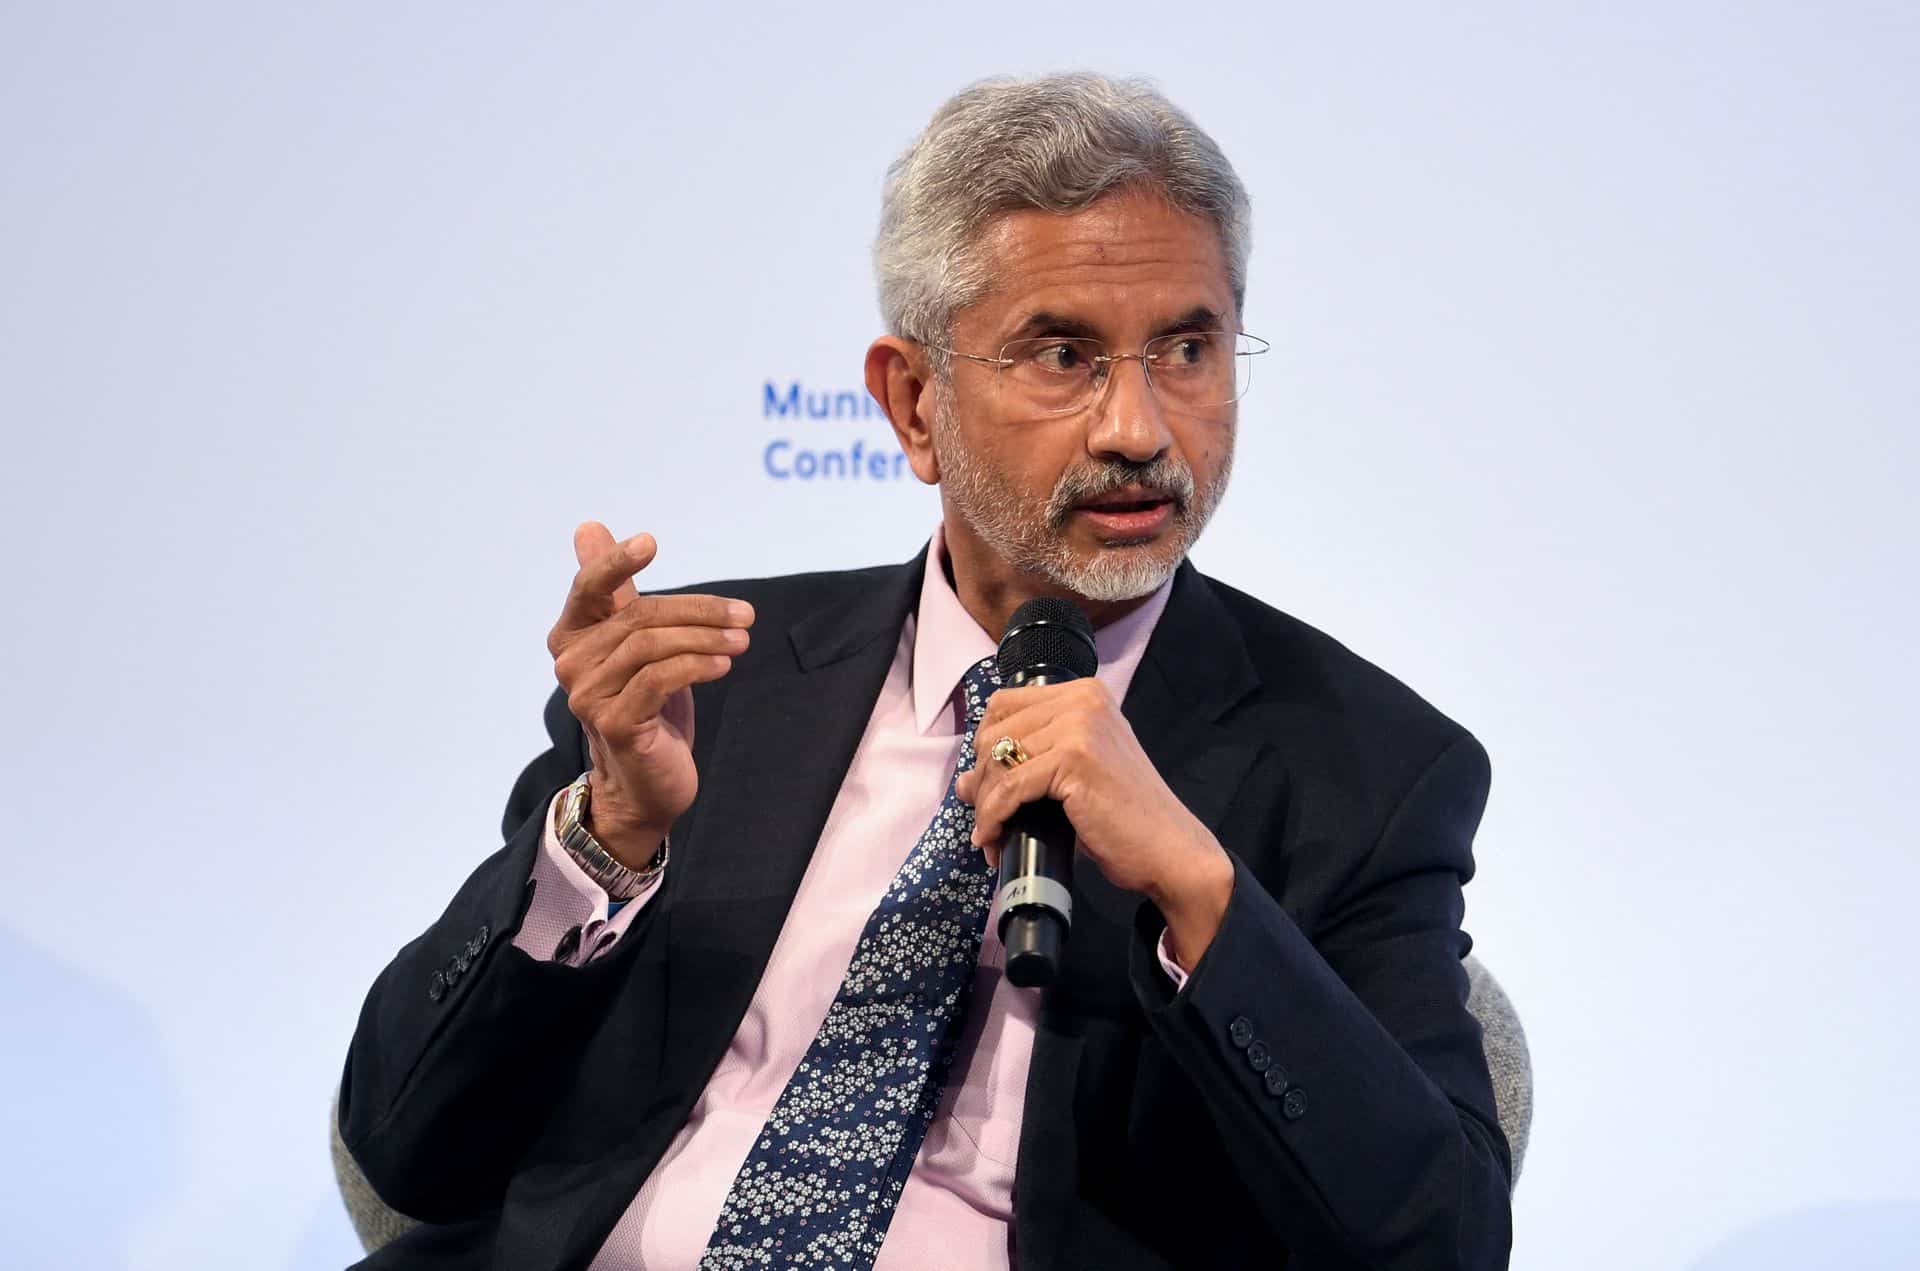 George Soros is old, rich, opinionated and dangerous: Jaishankar after billionaire investor’s comment over PM Modi